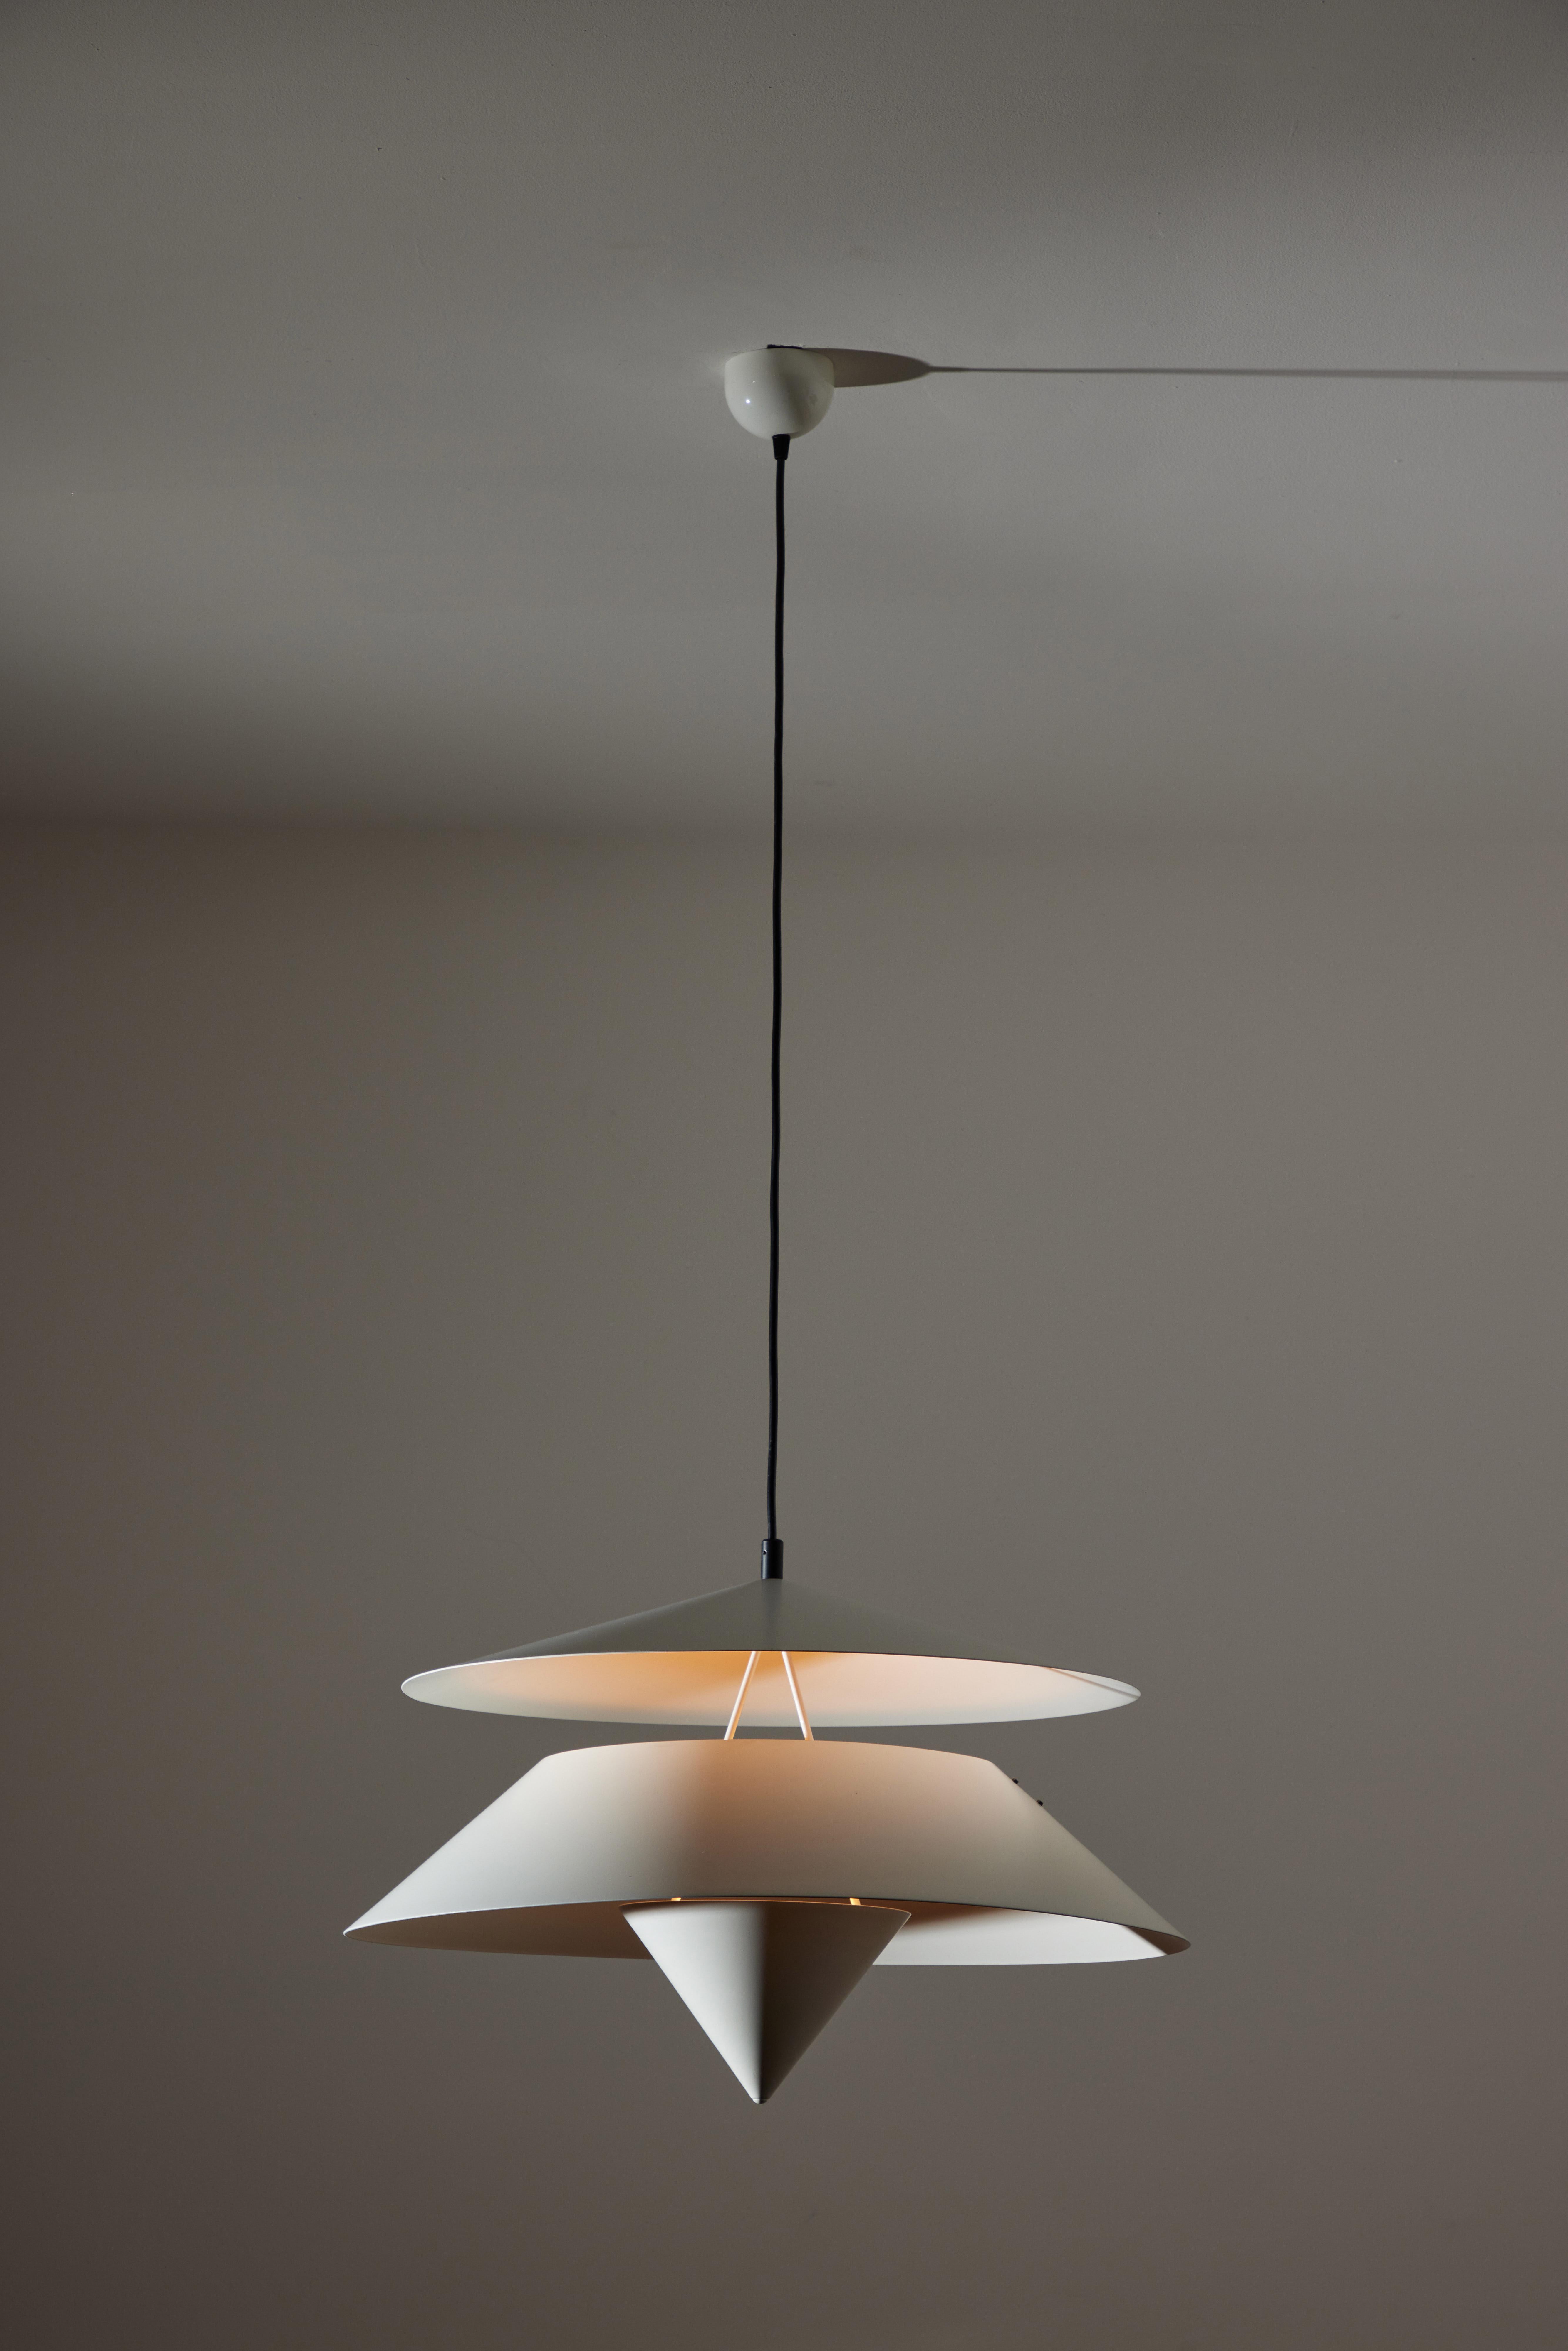 Akaari pendant by Vico Magistretti designed in Italy for Oluce, 1985. Painted aluminum and metal. Provides uplight and downlight. Original canopy. Wired for US junction boxes. Takes two E27 75w maximum bulbs. Please note this light is headstock